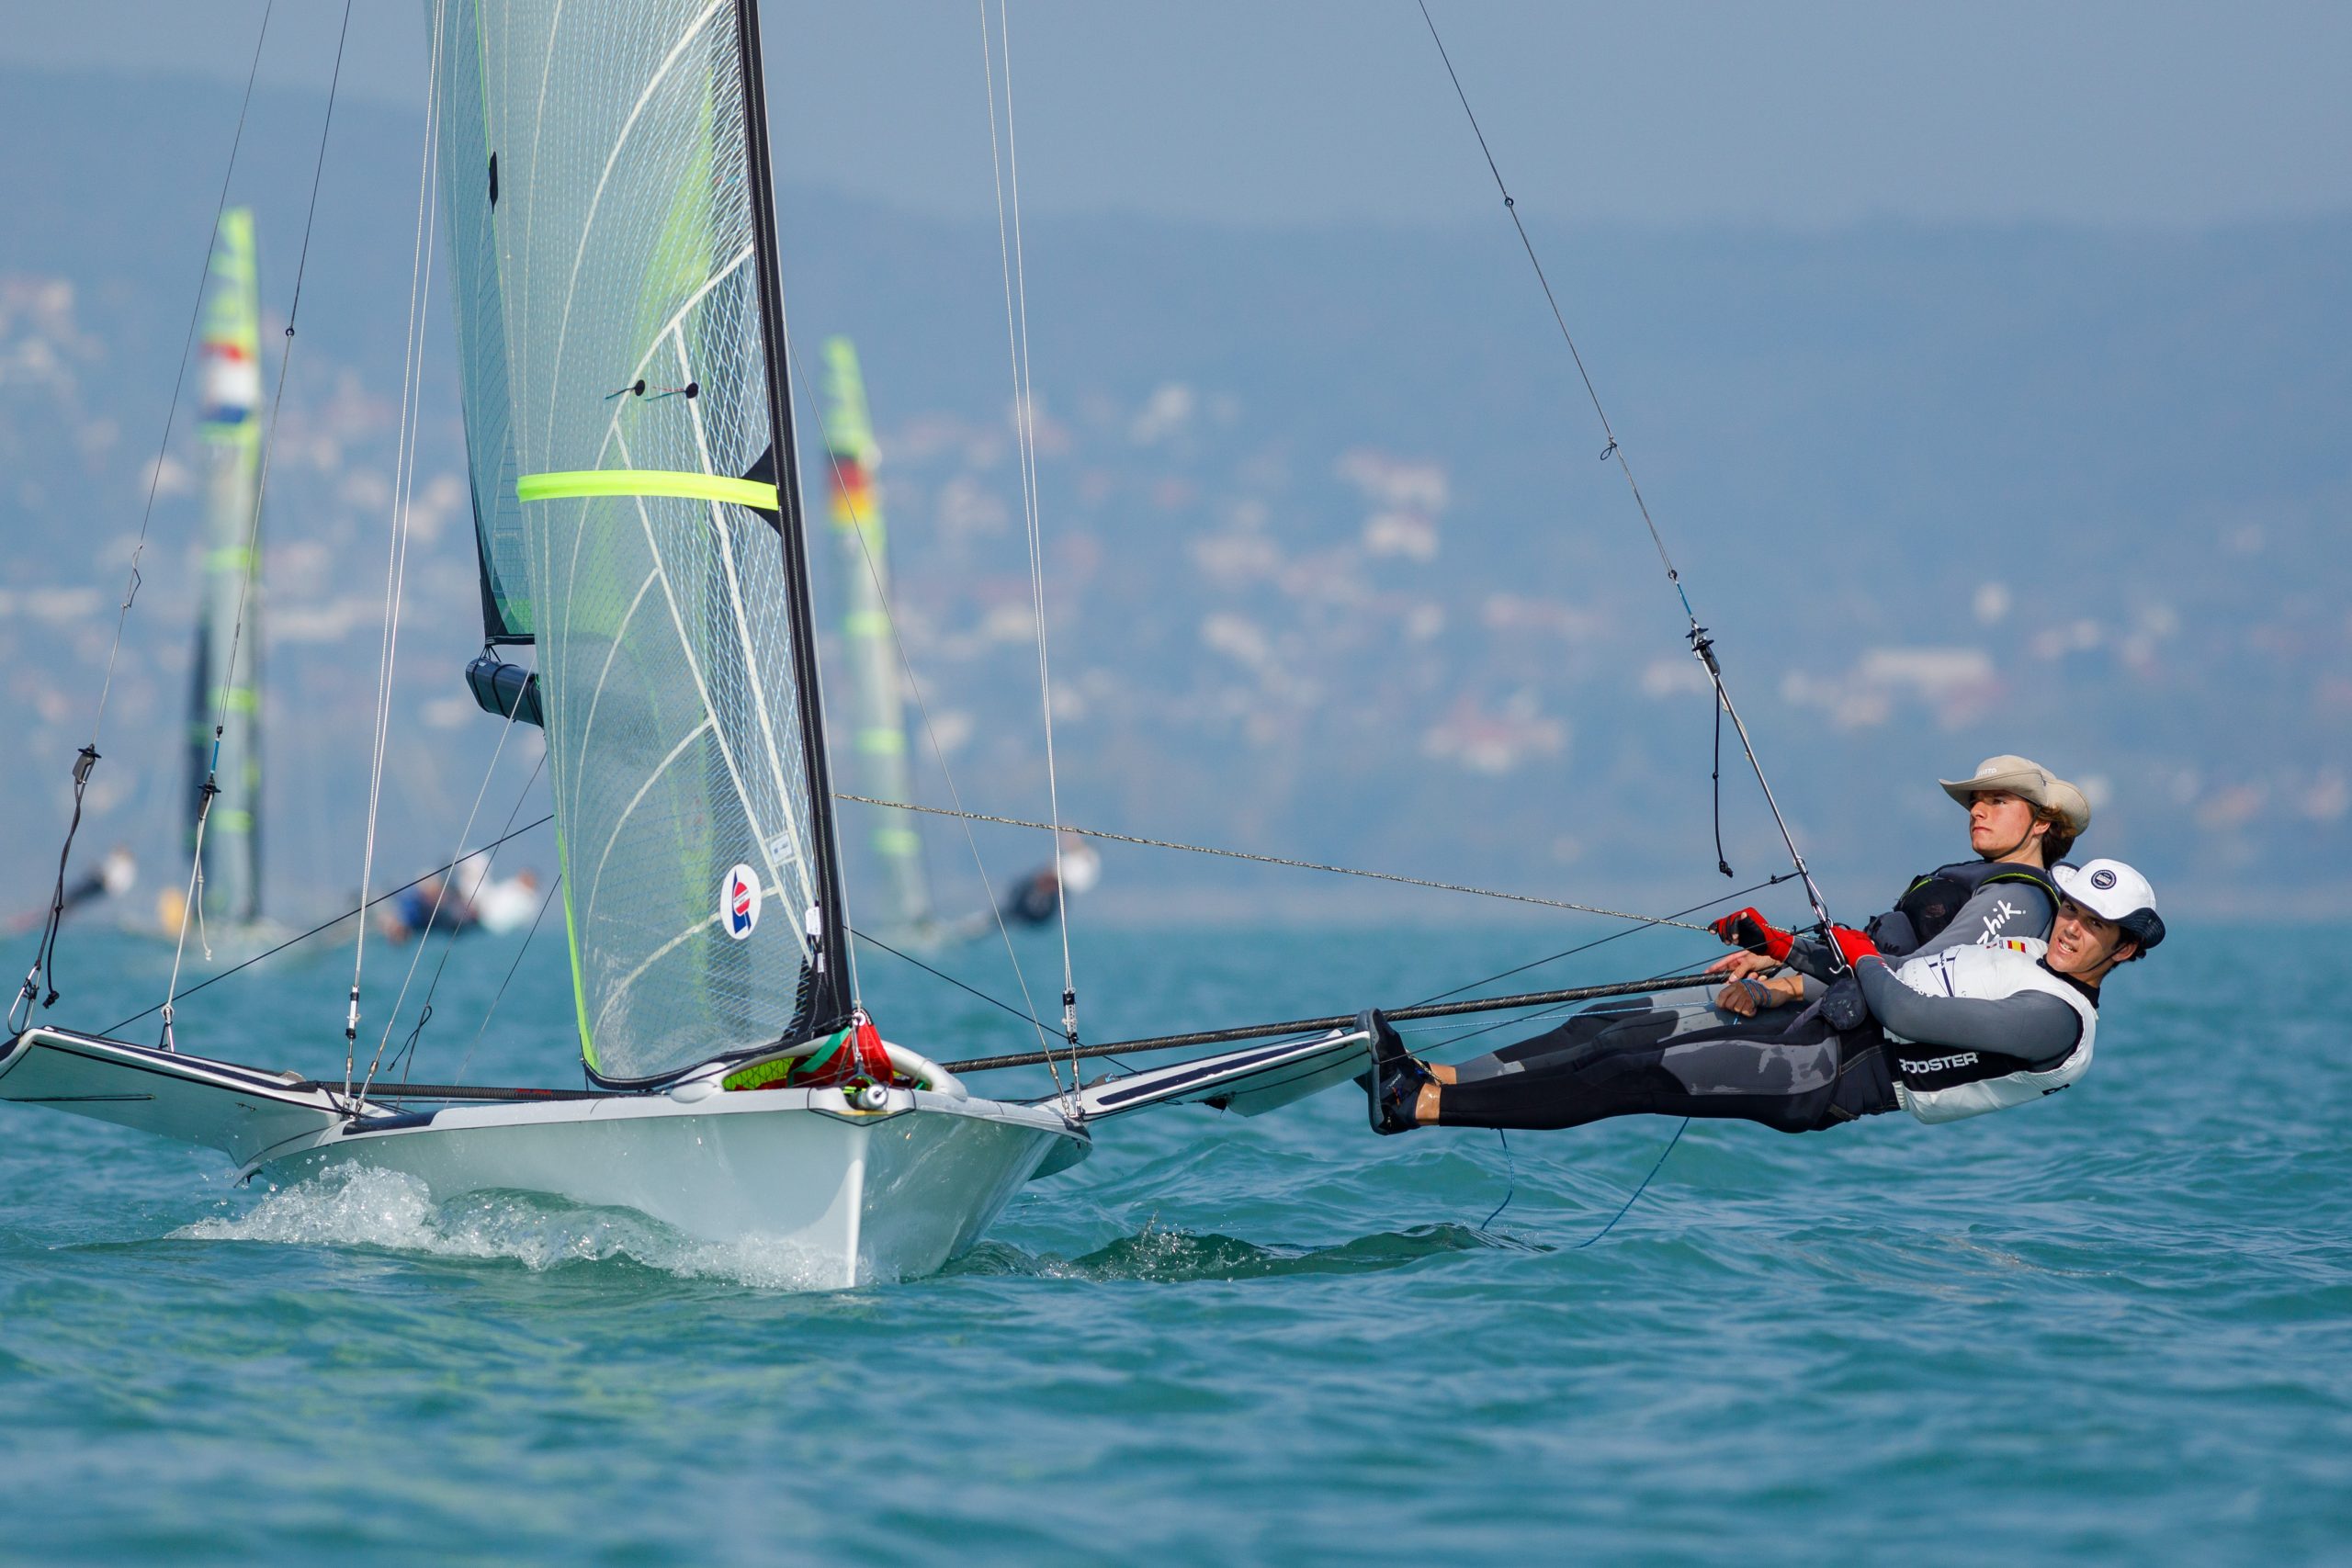 Hungarian boat wins the first race at the 49er and 49erFX Junior European Championships